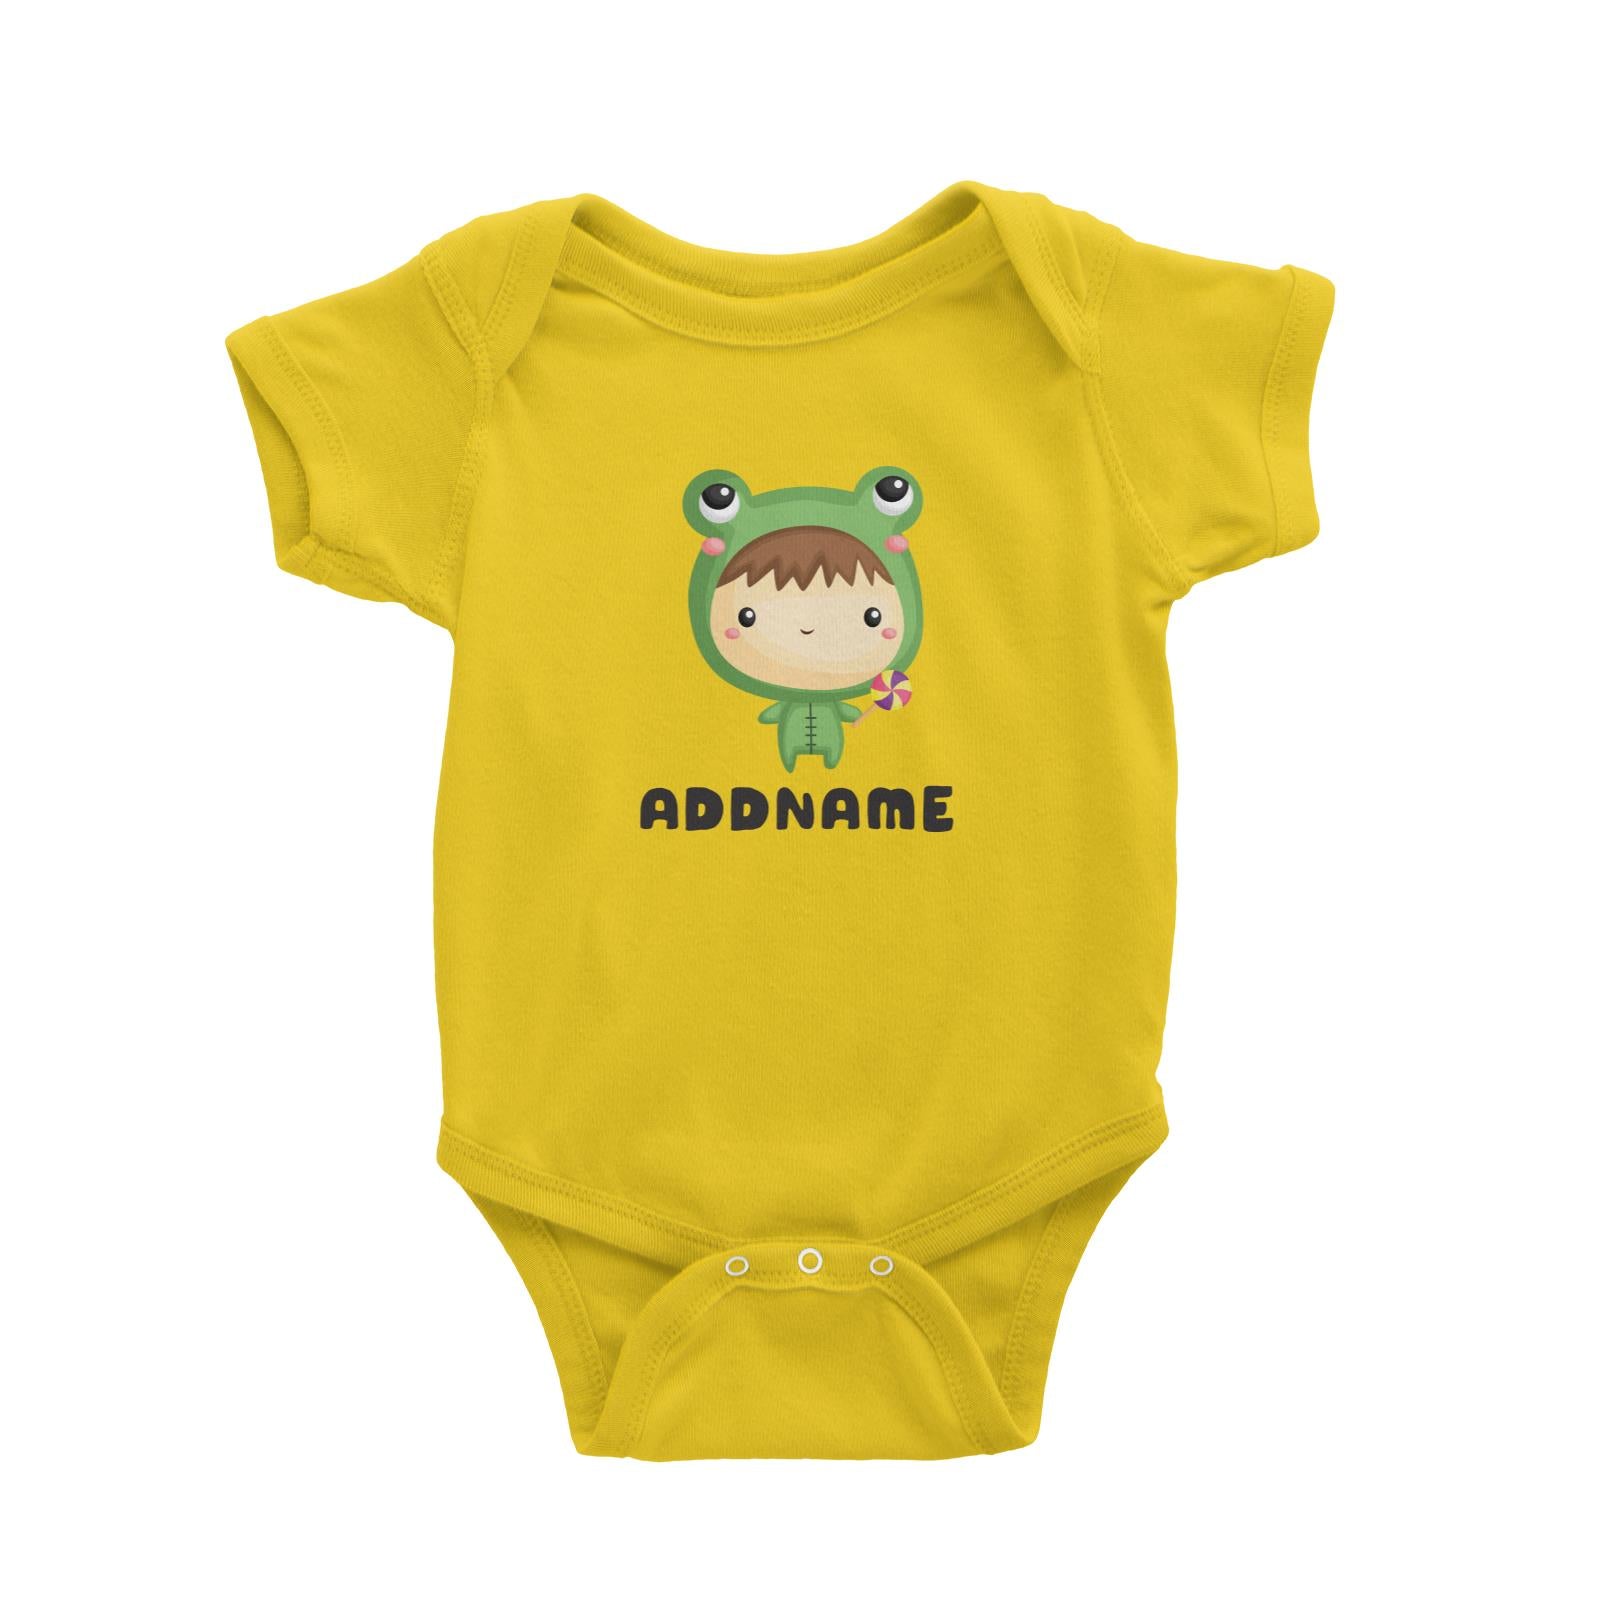 Birthday Frog Baby Boy Wearing Frog Suit Holding Lolipop Addname Baby Romper